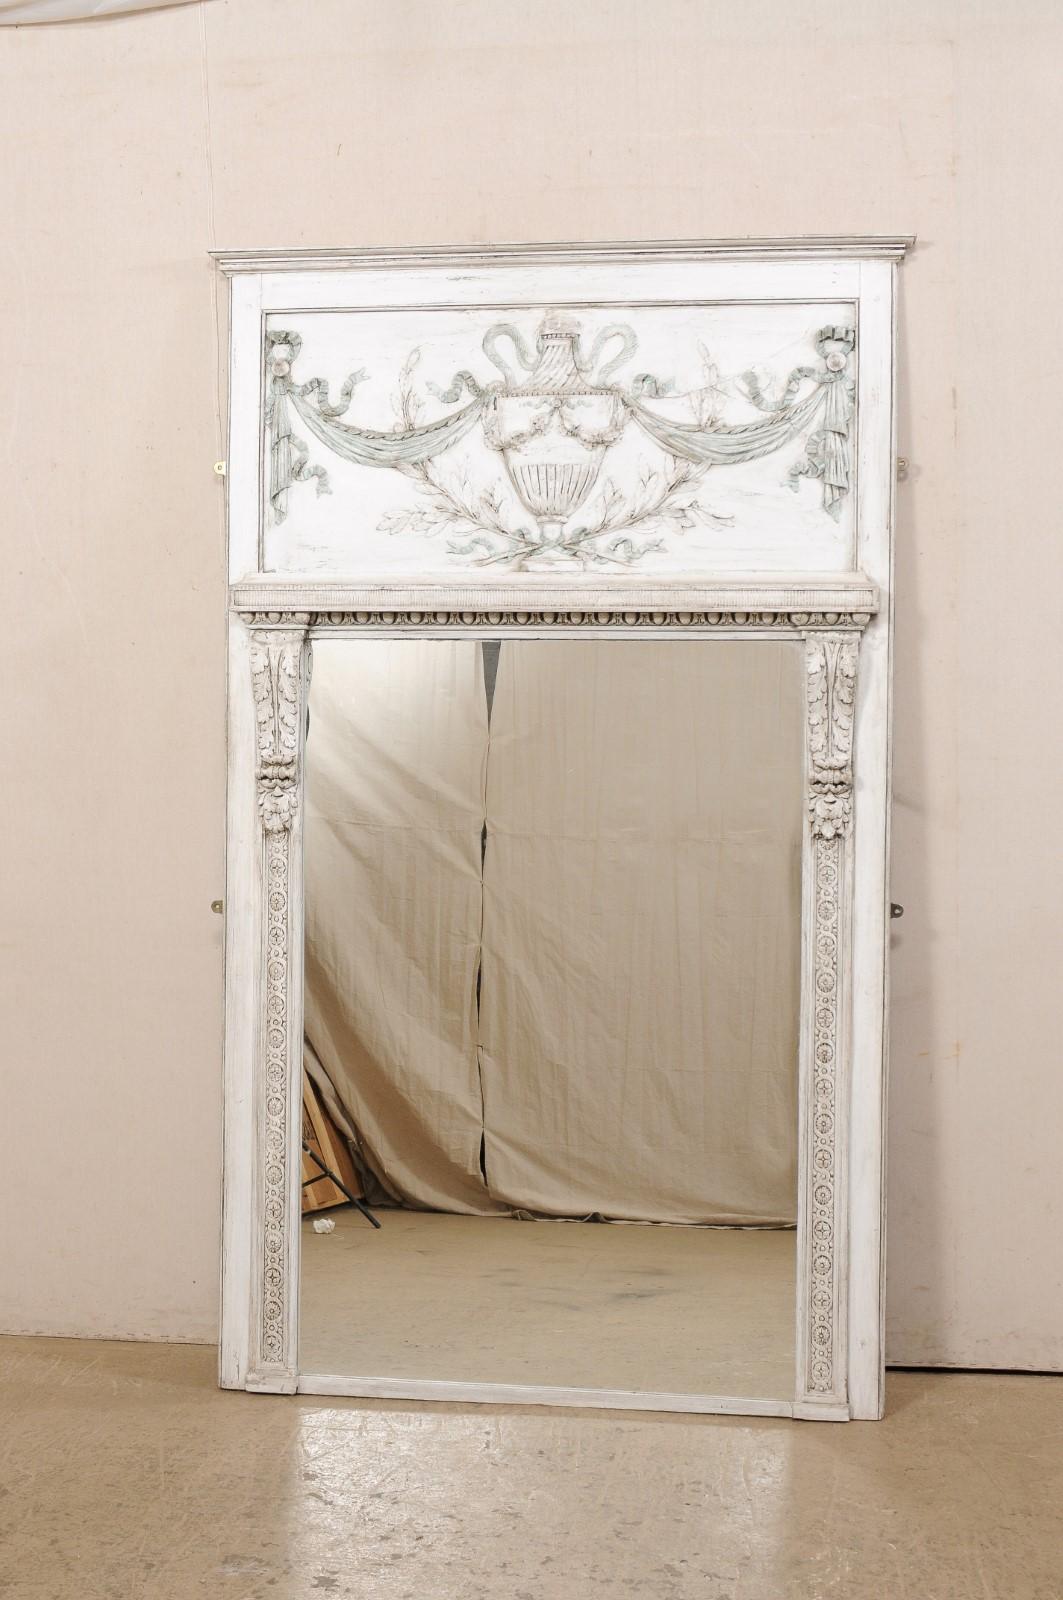 A French Neoclassic-style painted wood trumeau mirror. This vintage mirror from France features the carved-wood plaque top, reminiscent of trumeau design, with carved urn presented prominently and adorn with draped swags, cascading ribbons, and